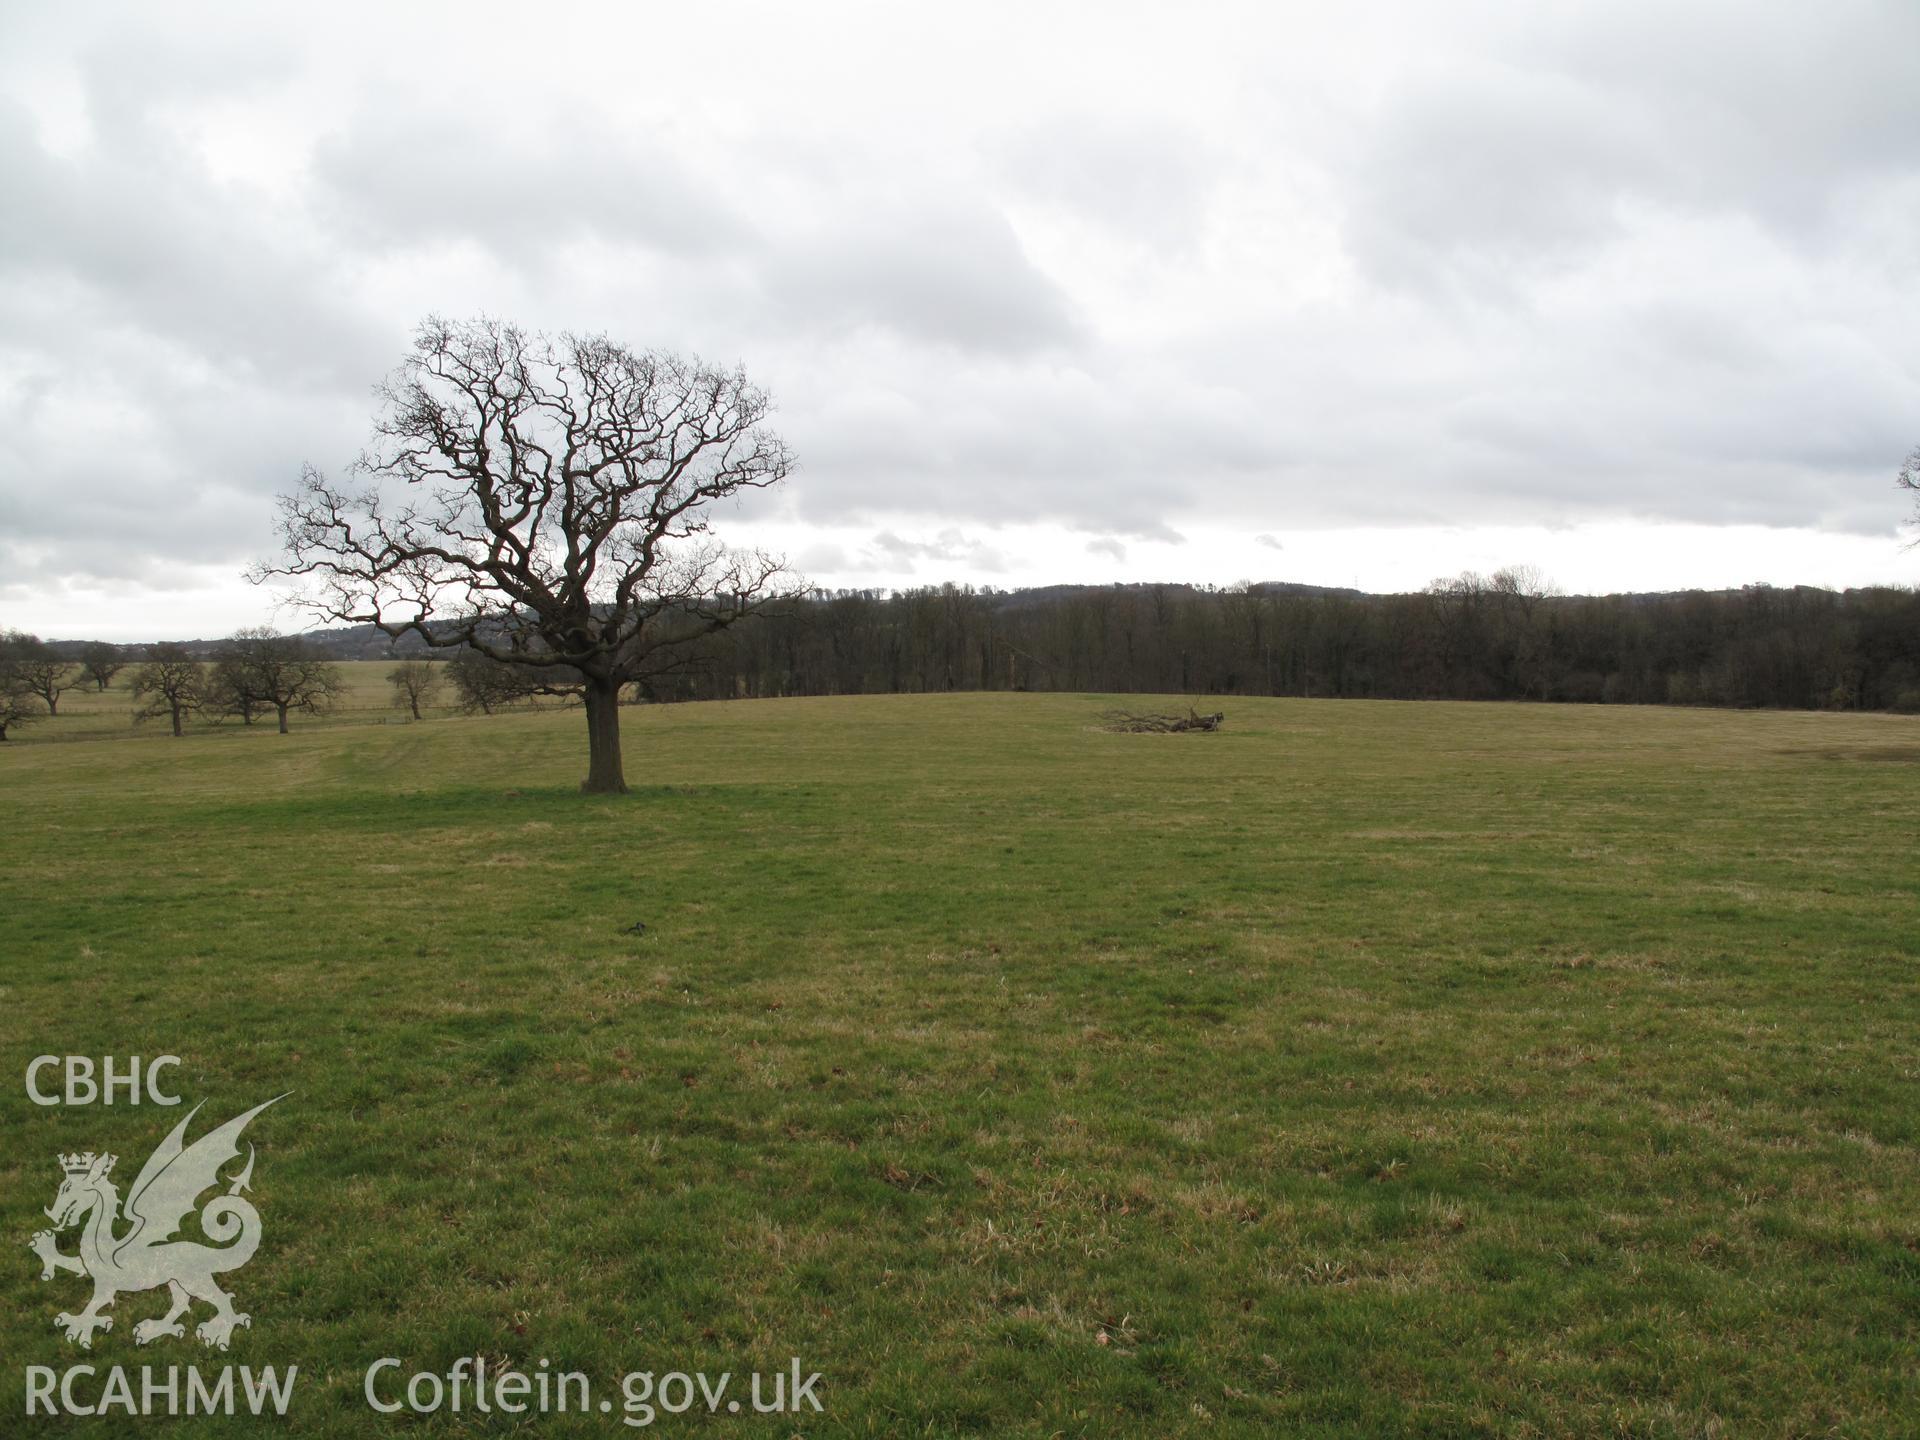 View of St Fagans battle site near Tregochas from the north taken by Brian Malaws on 27 February 2009.